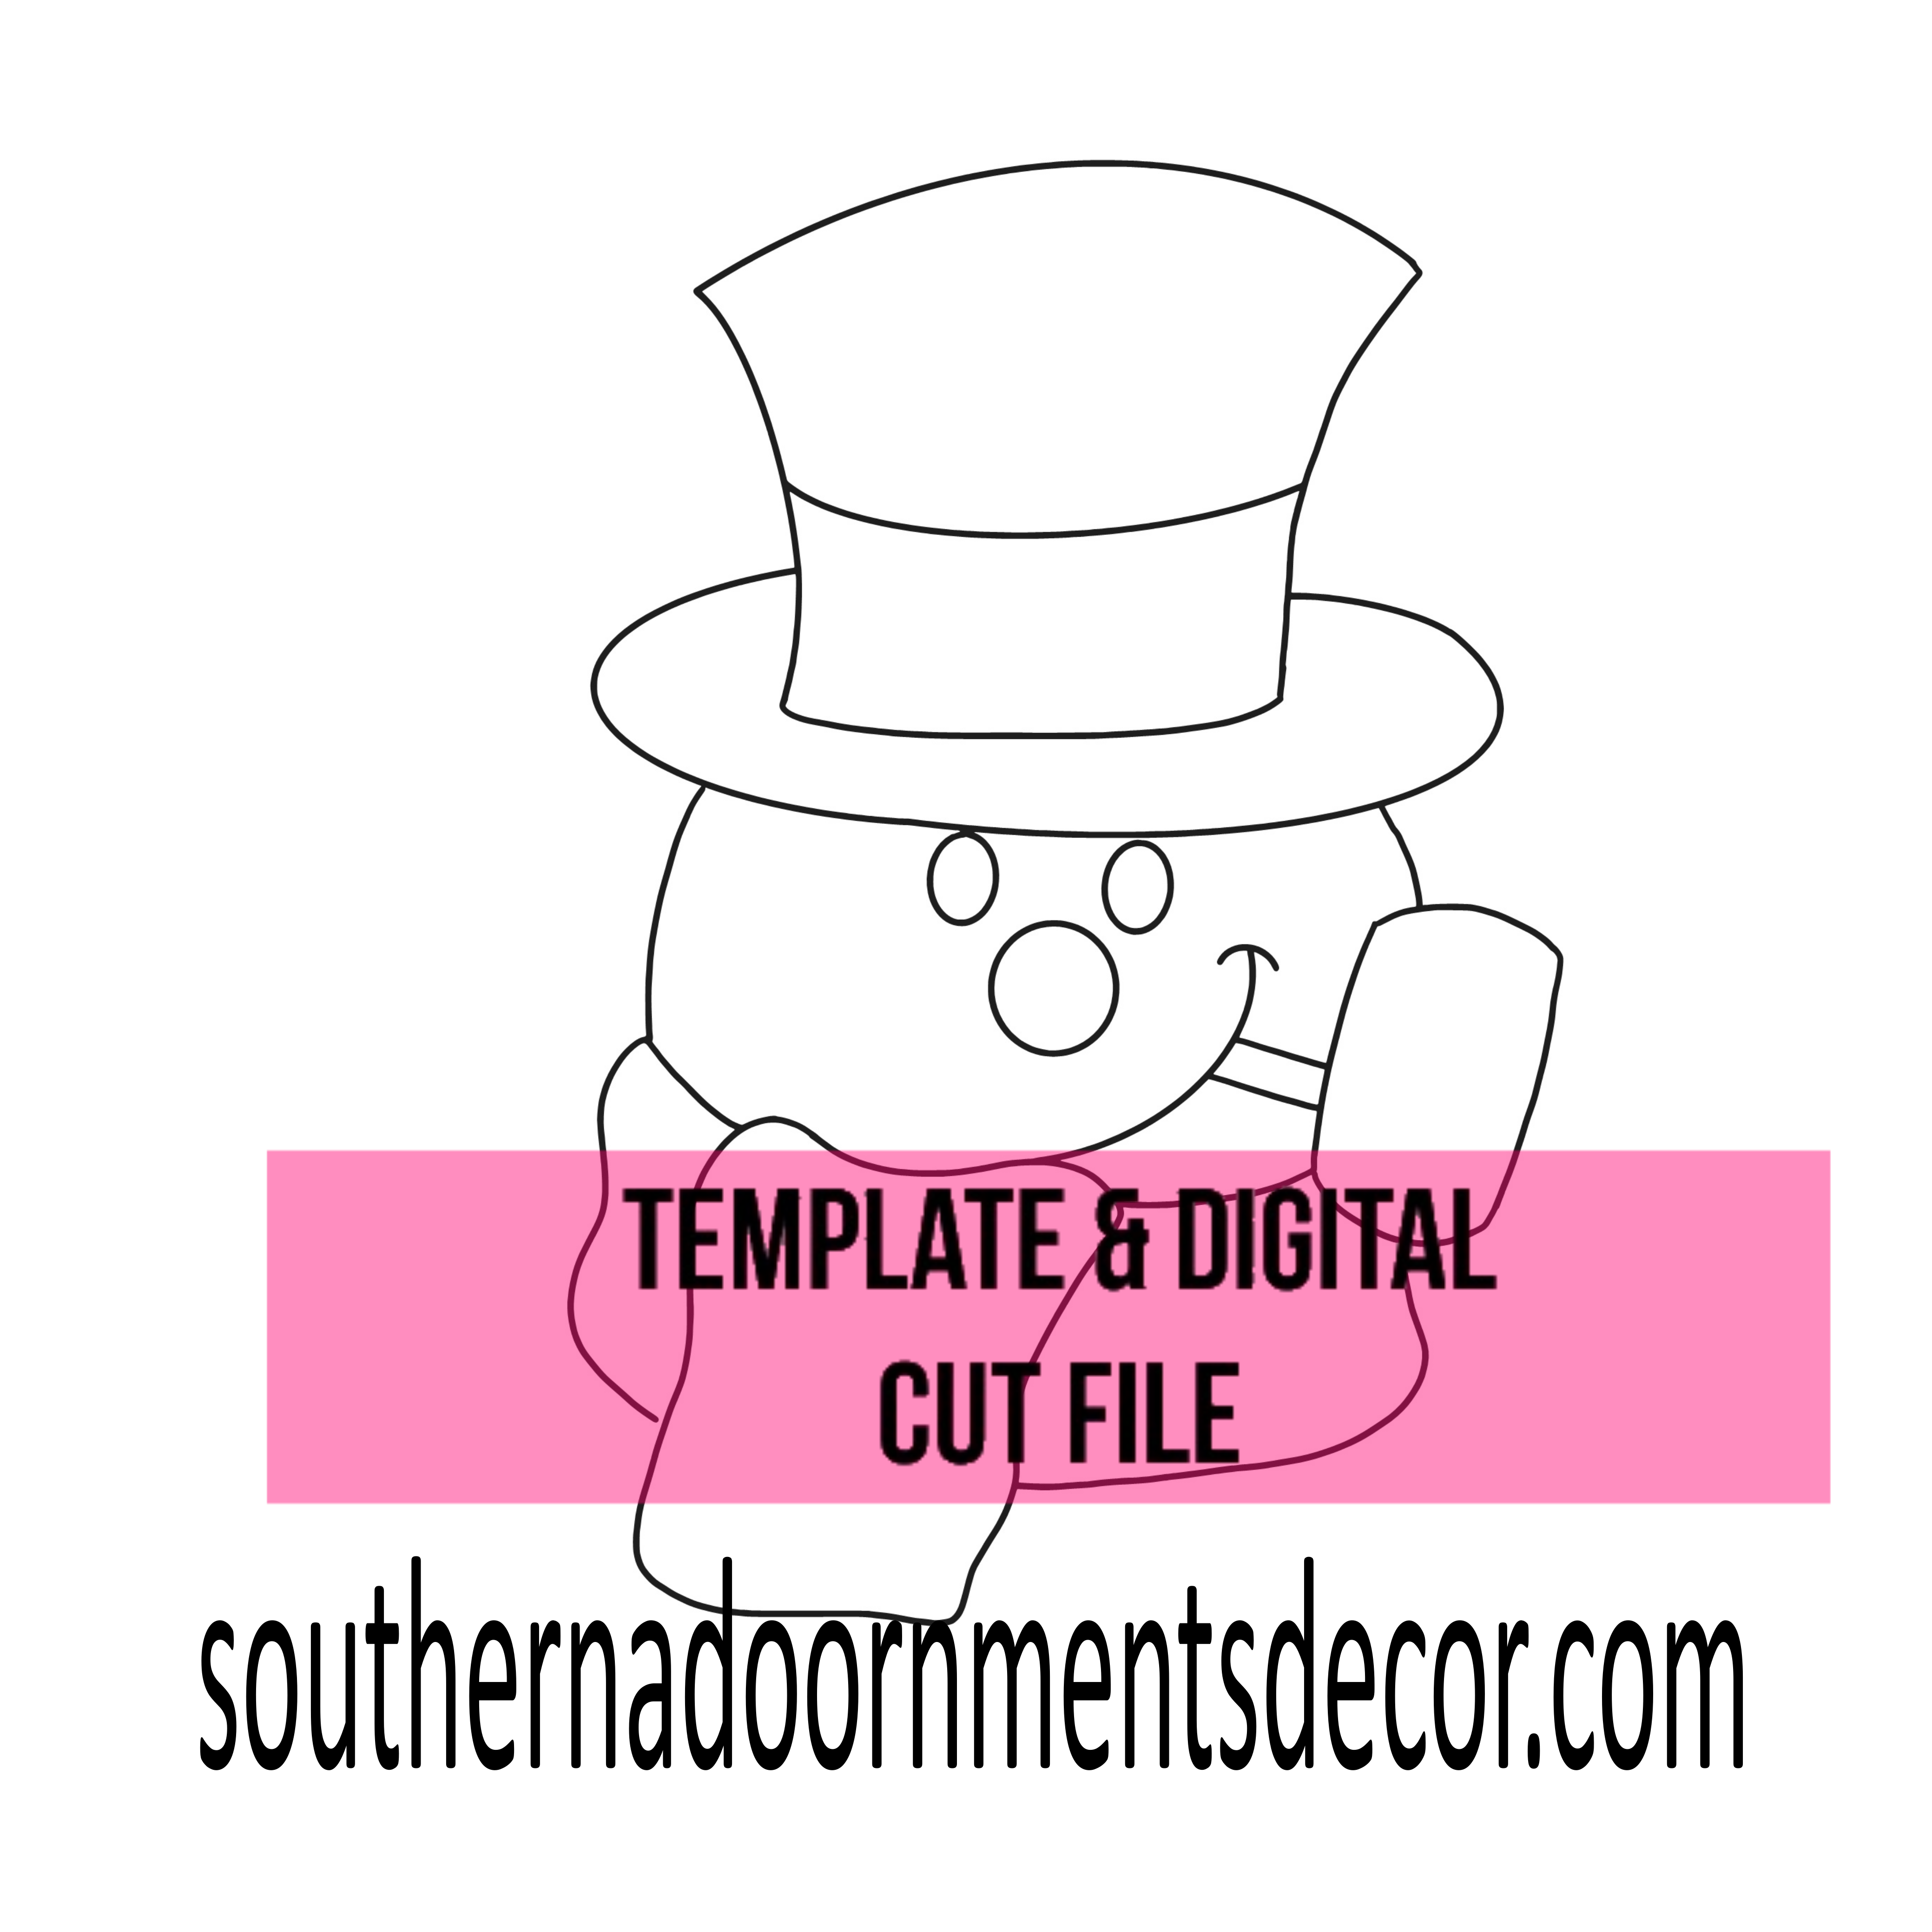 Snowman with Pipe Ornament Template & Digital Cut File